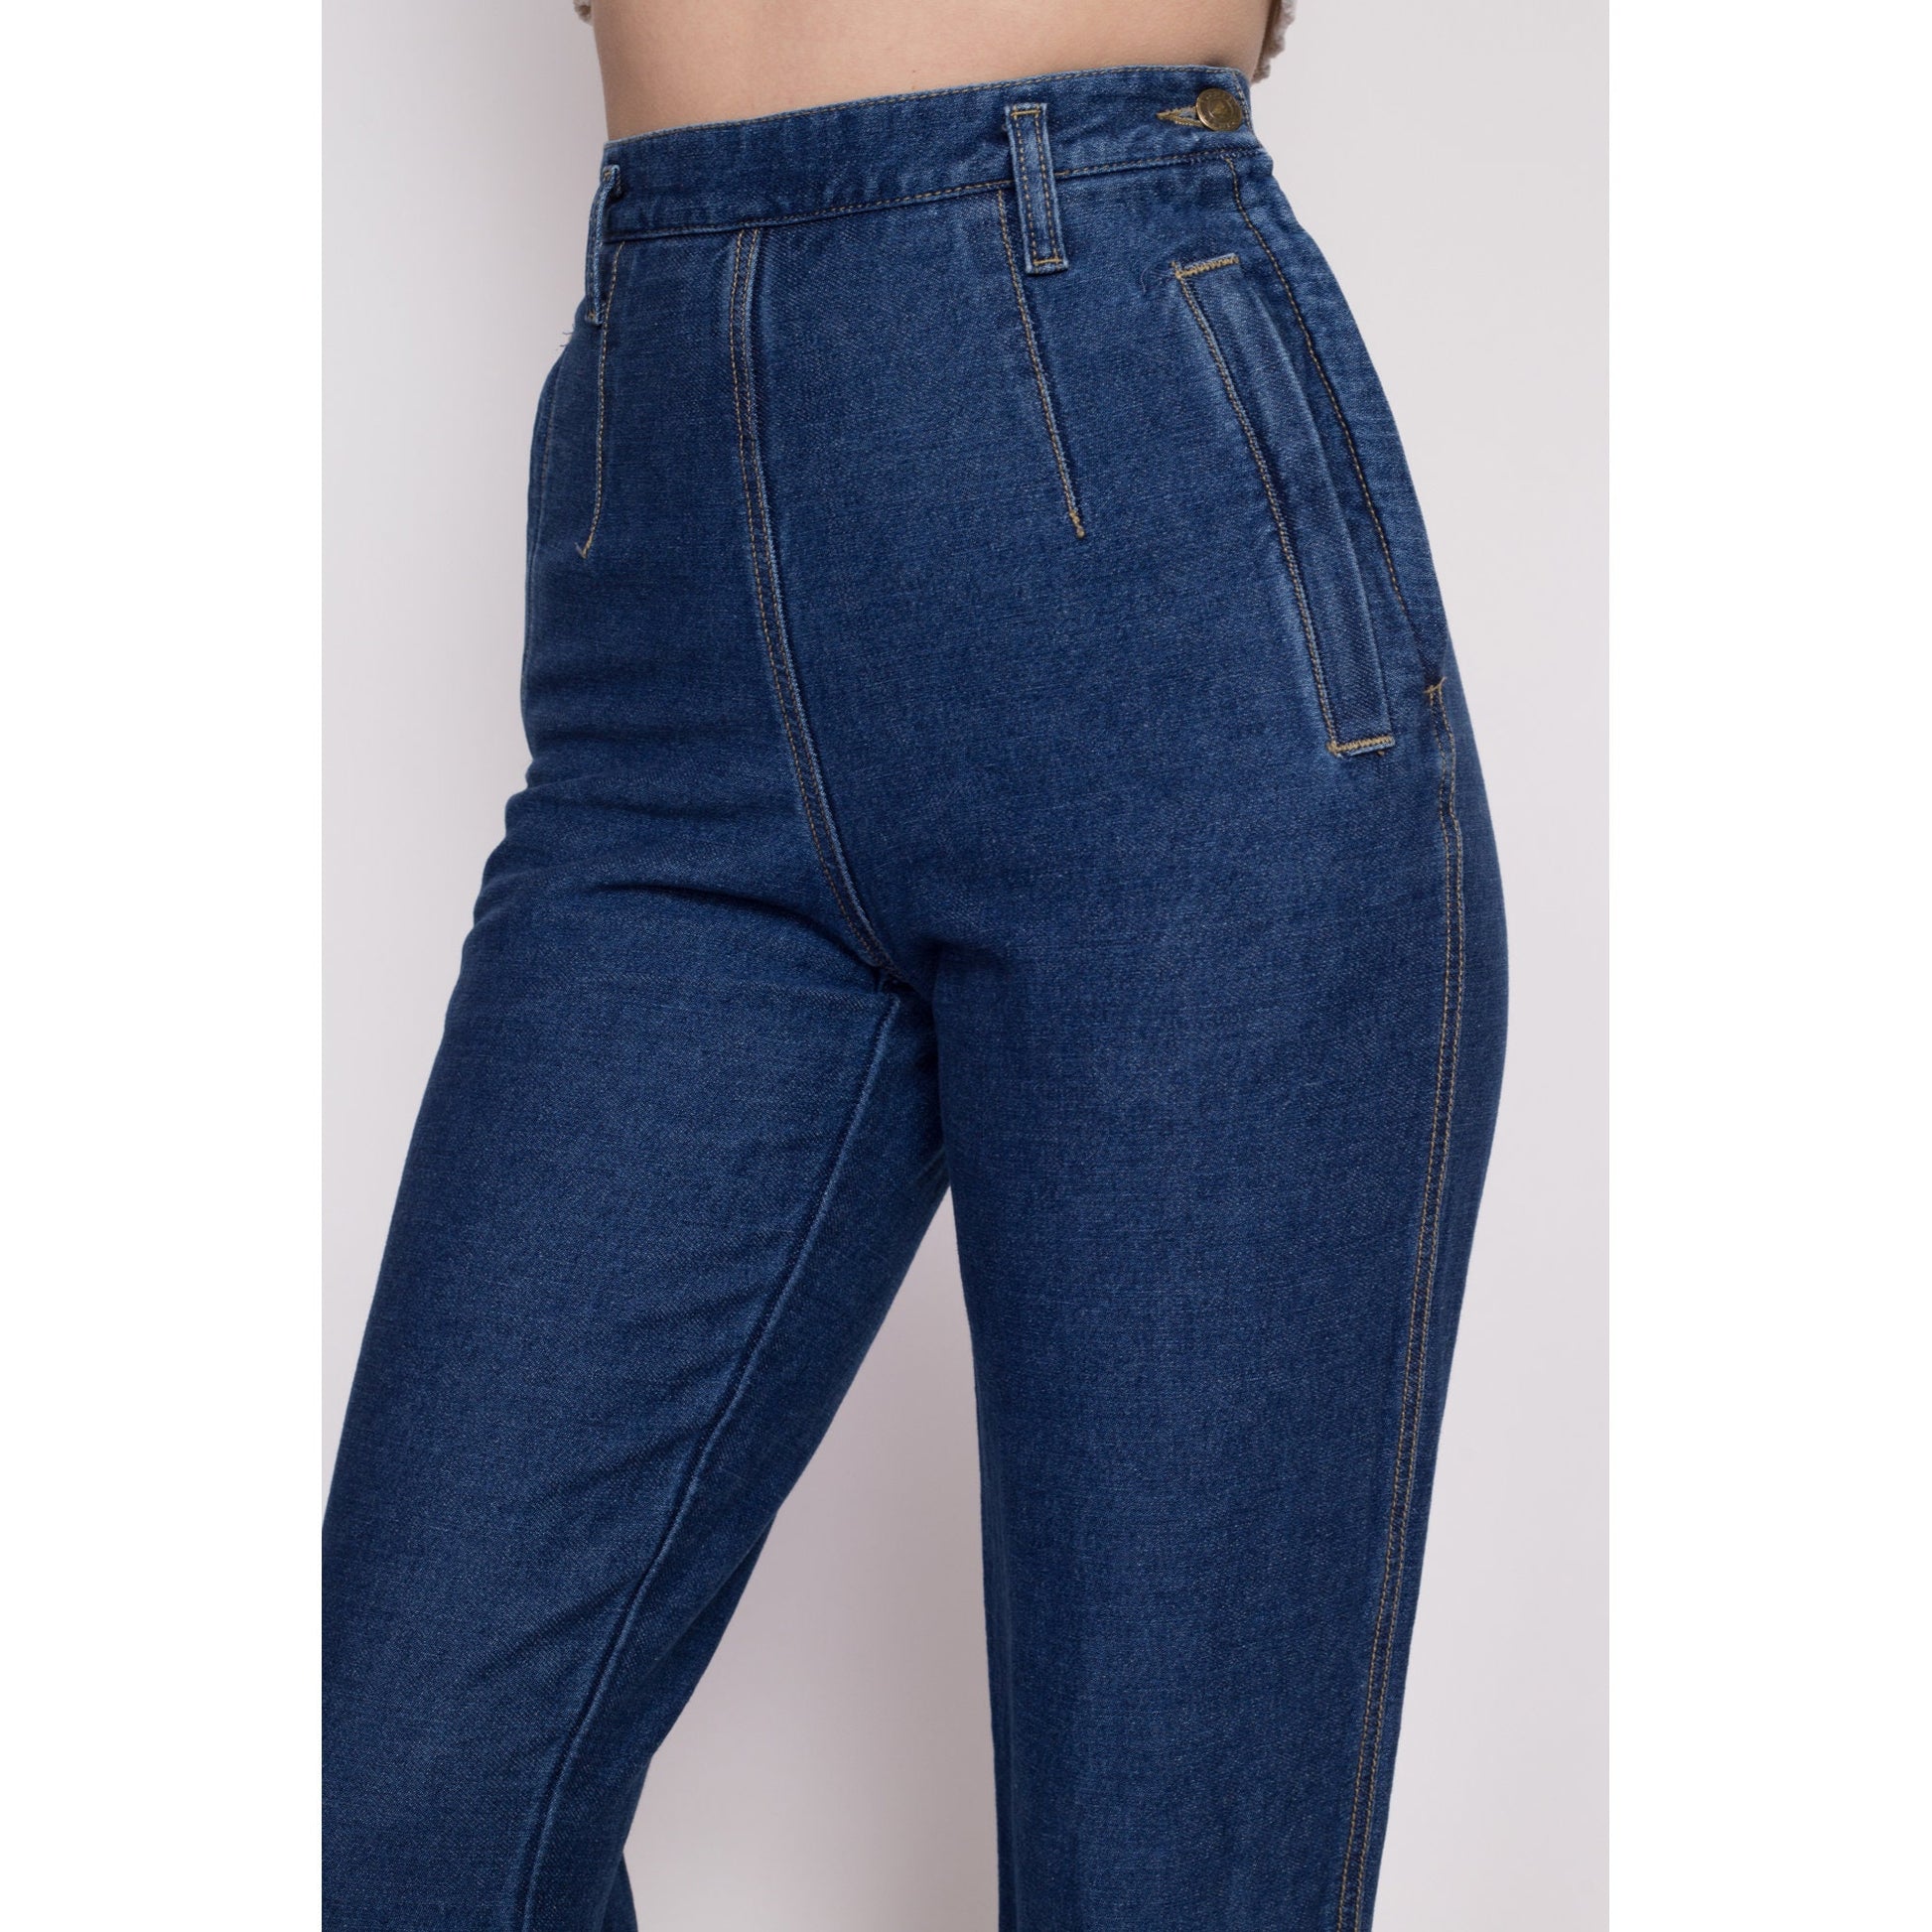 High Waist Stretchy Skinny Jeans With Side Pockets And Washed